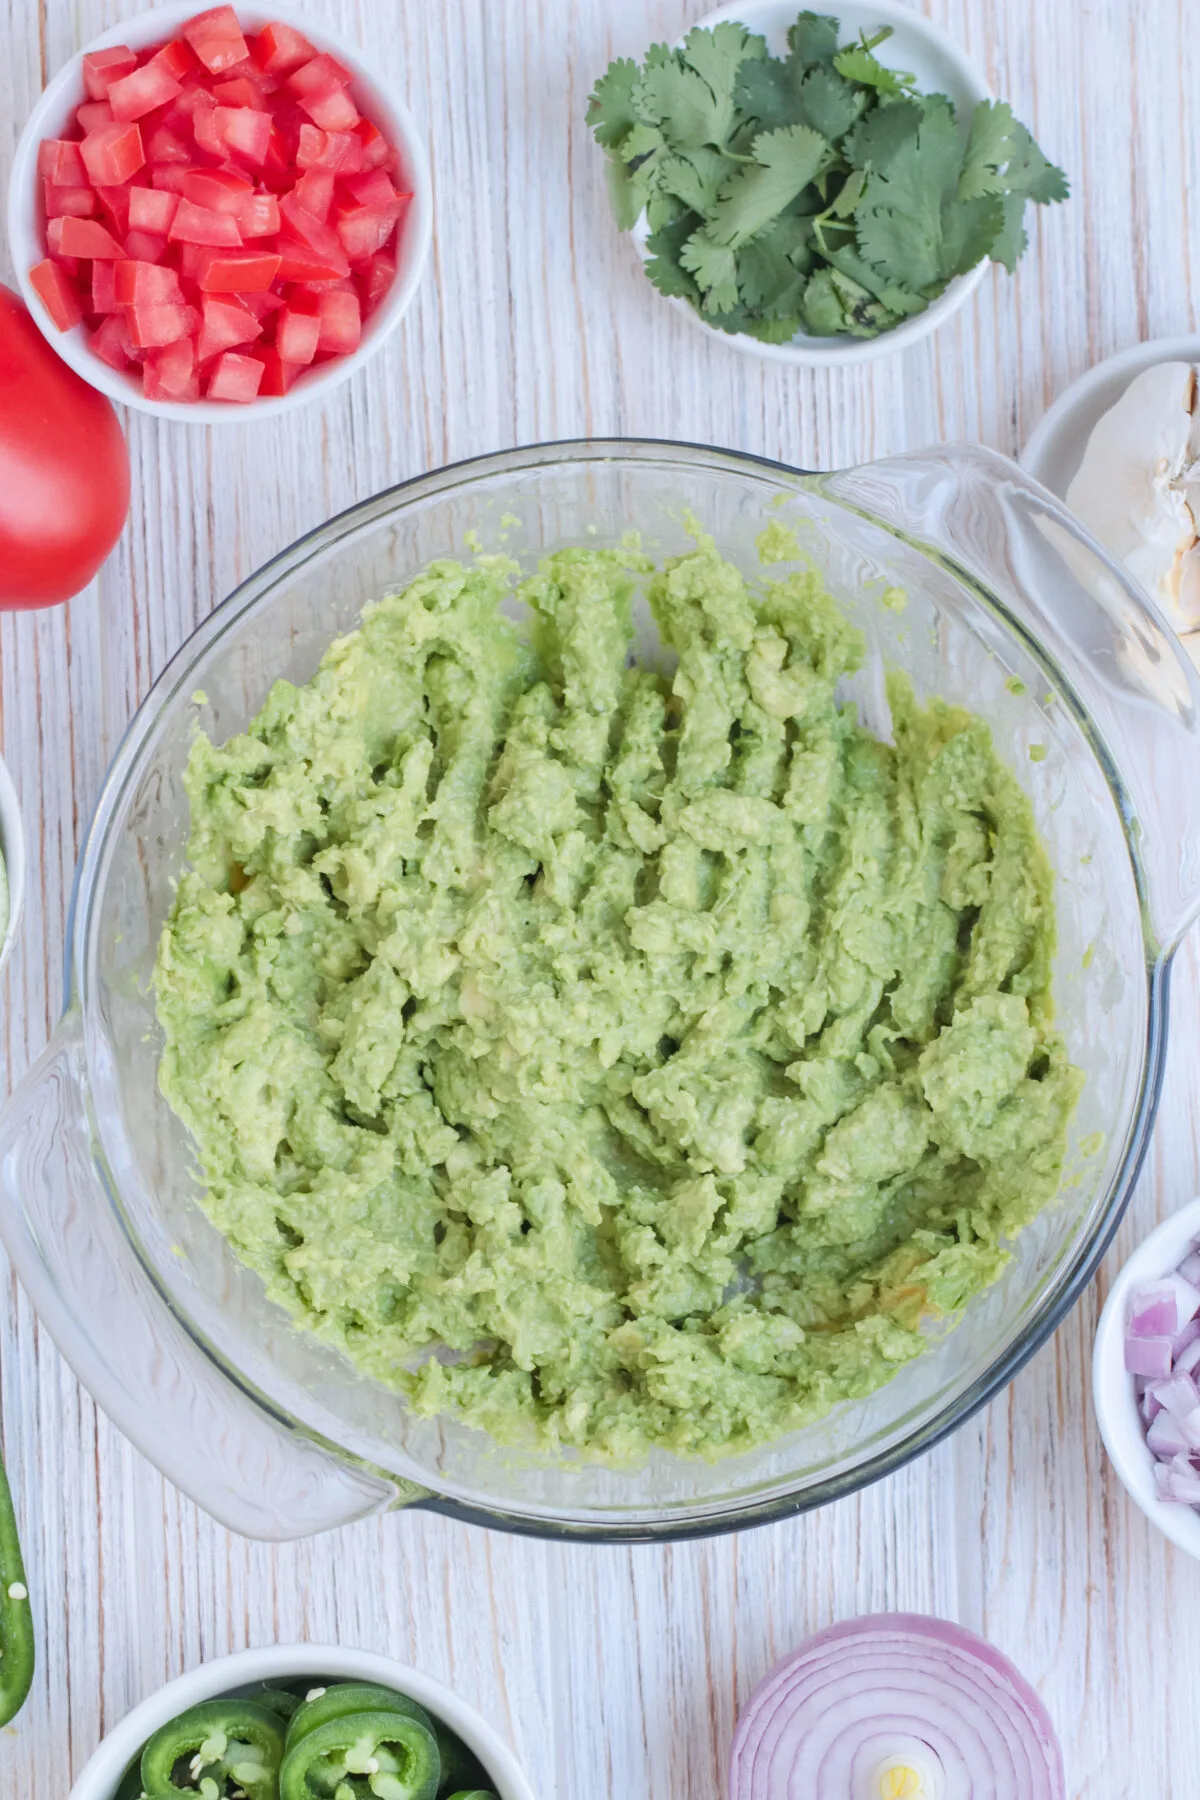 Avocados mashed up in a bowl.